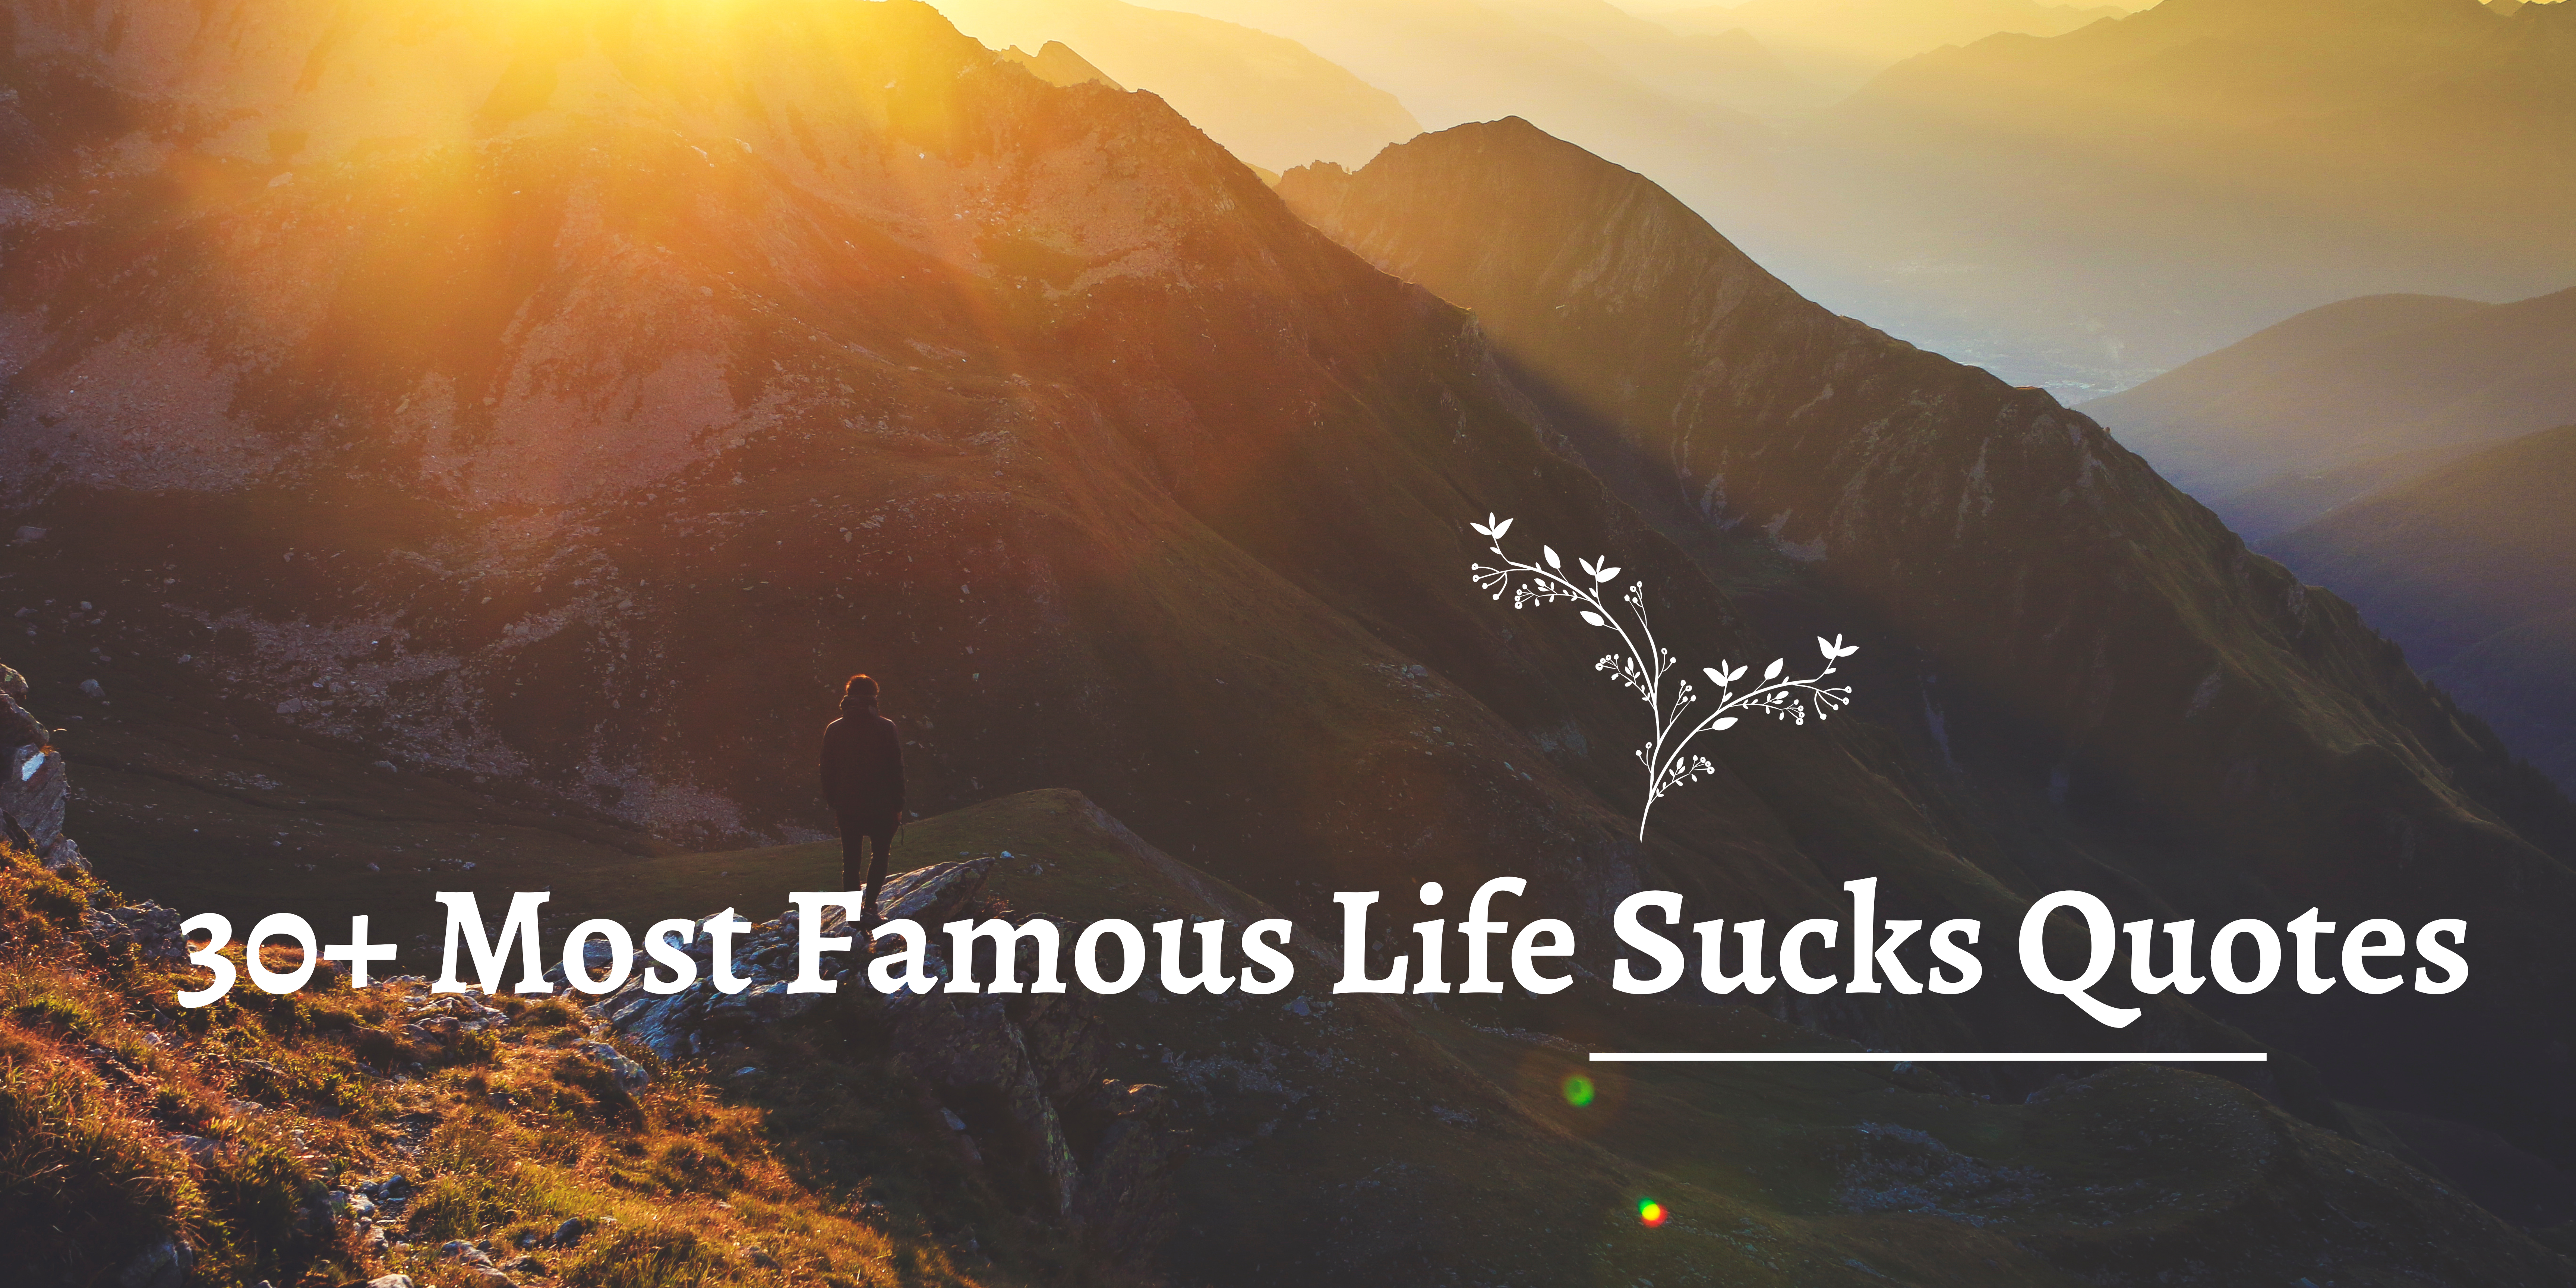 30+ Most Famous Life Sucks Quotes: A Glimpse into Life’s Challenges